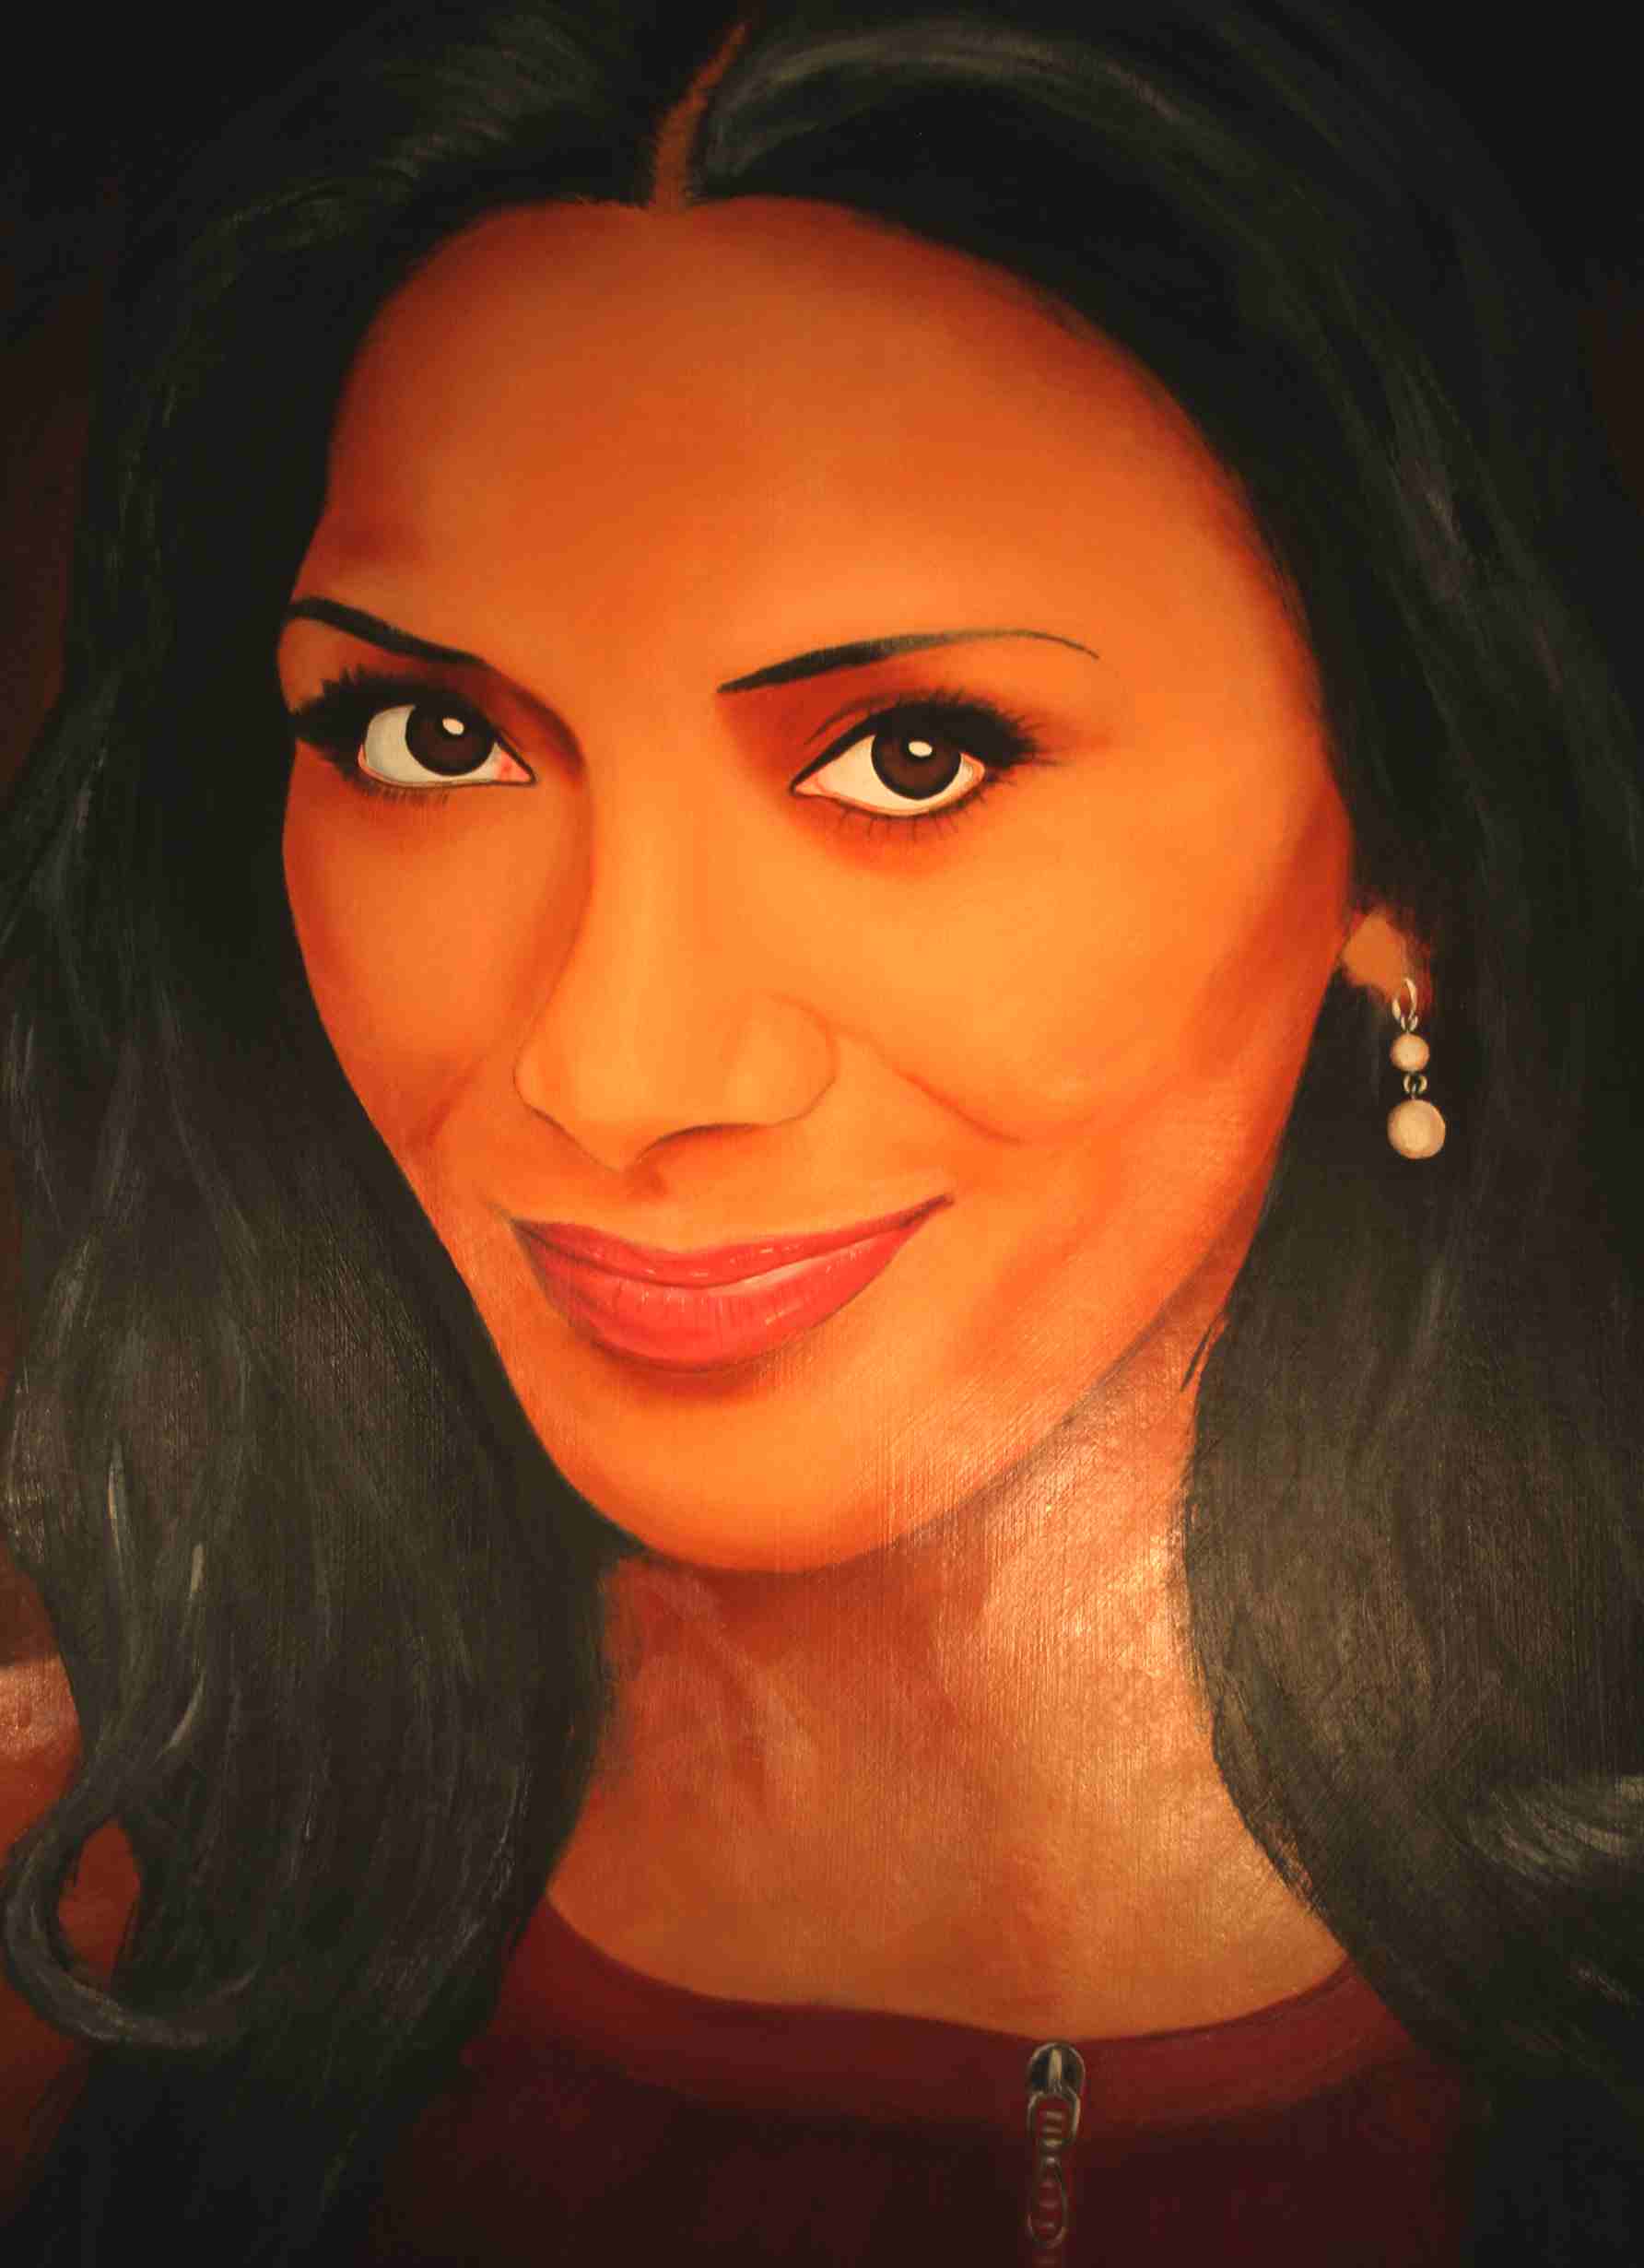 Nicole Sherzinger, pussycat doll singer and actress, portrait in oils by Nelson Kruschandl